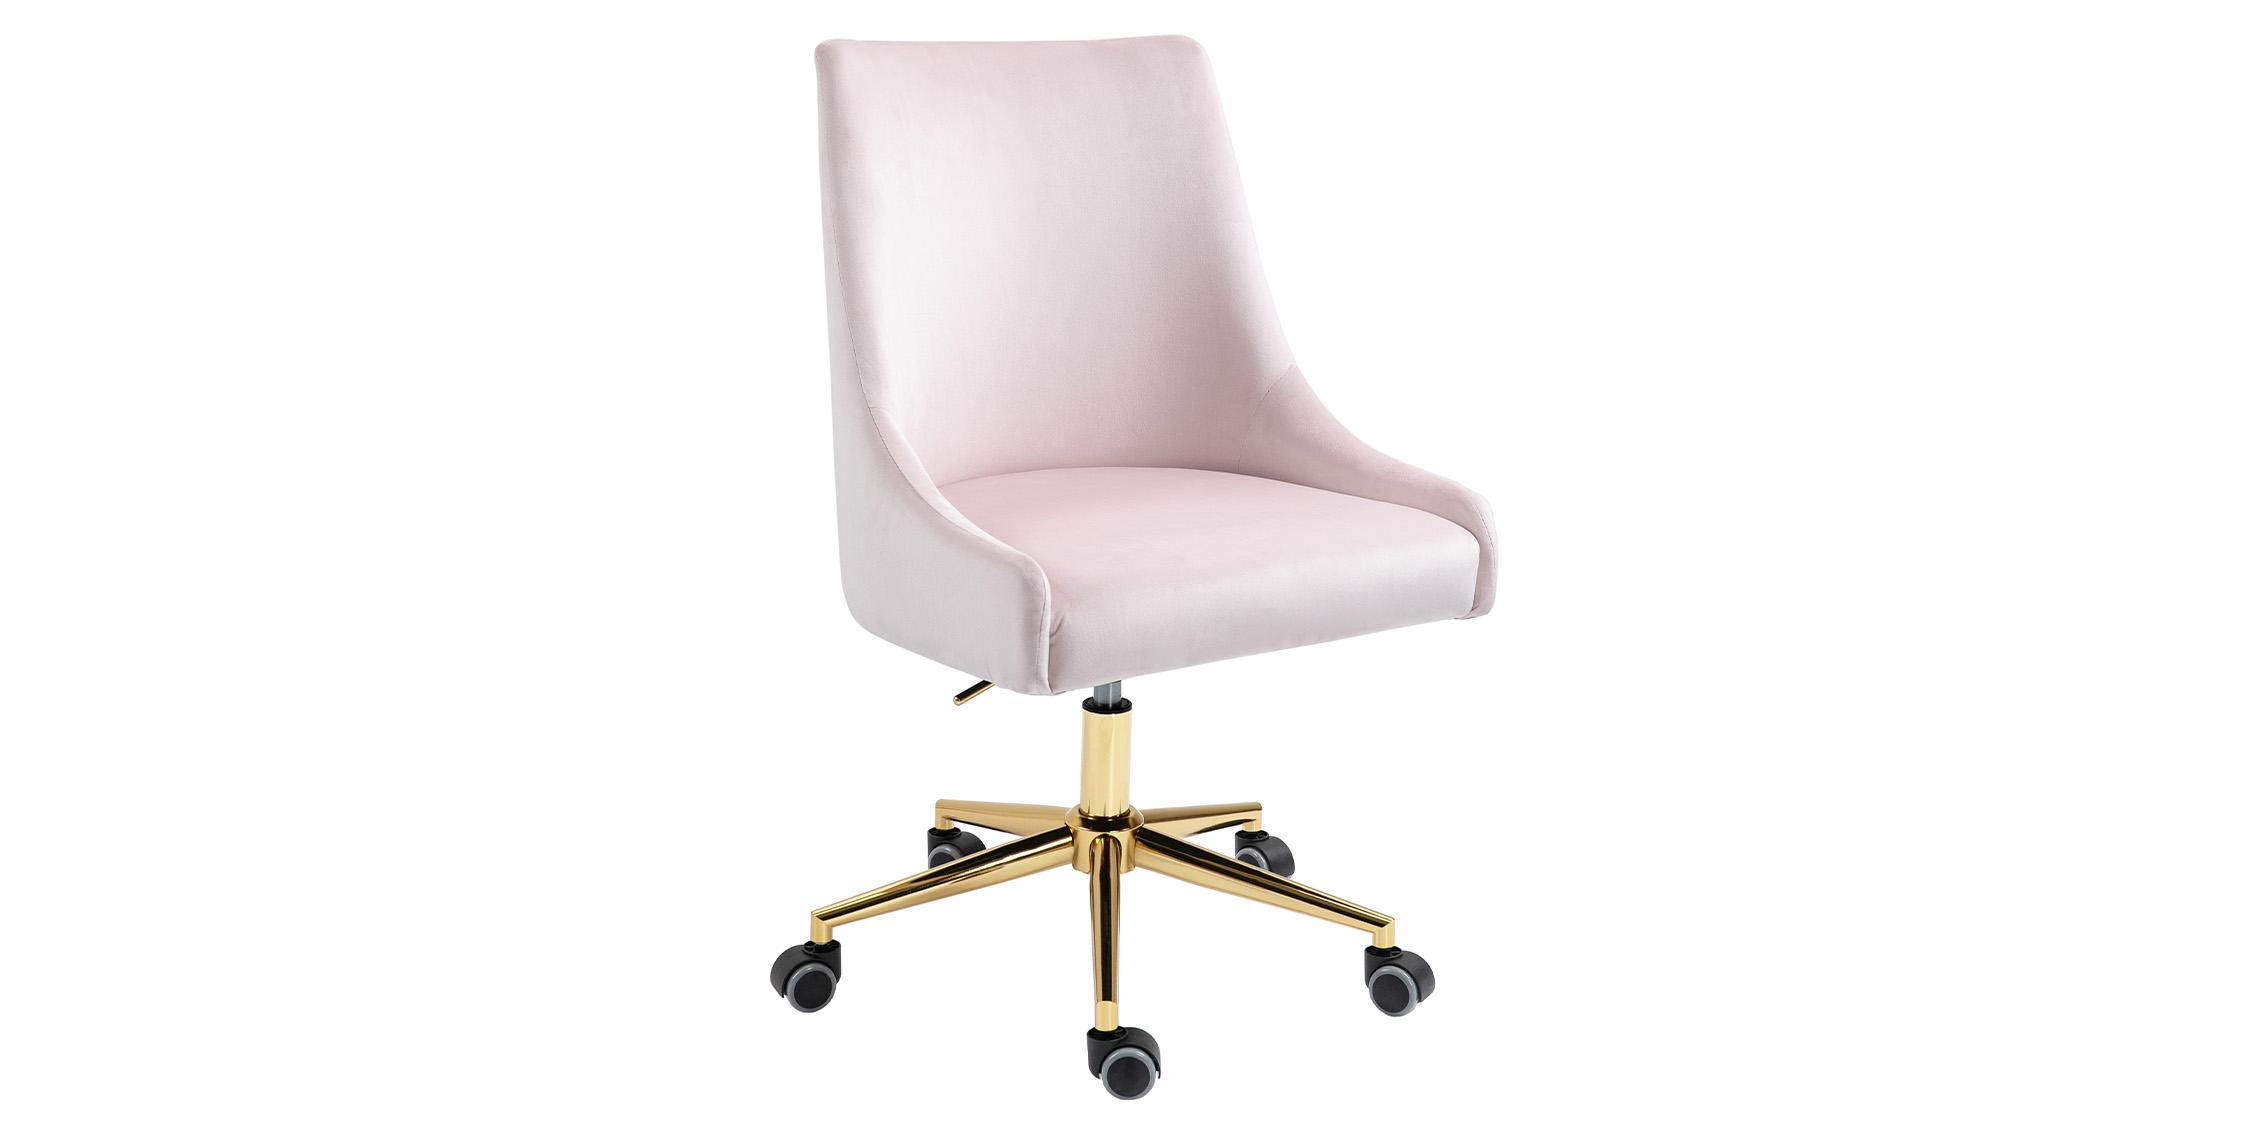 Contemporary, Modern Office Chair KARINA 163Pink 163Pink in Pink, Gold Fabric